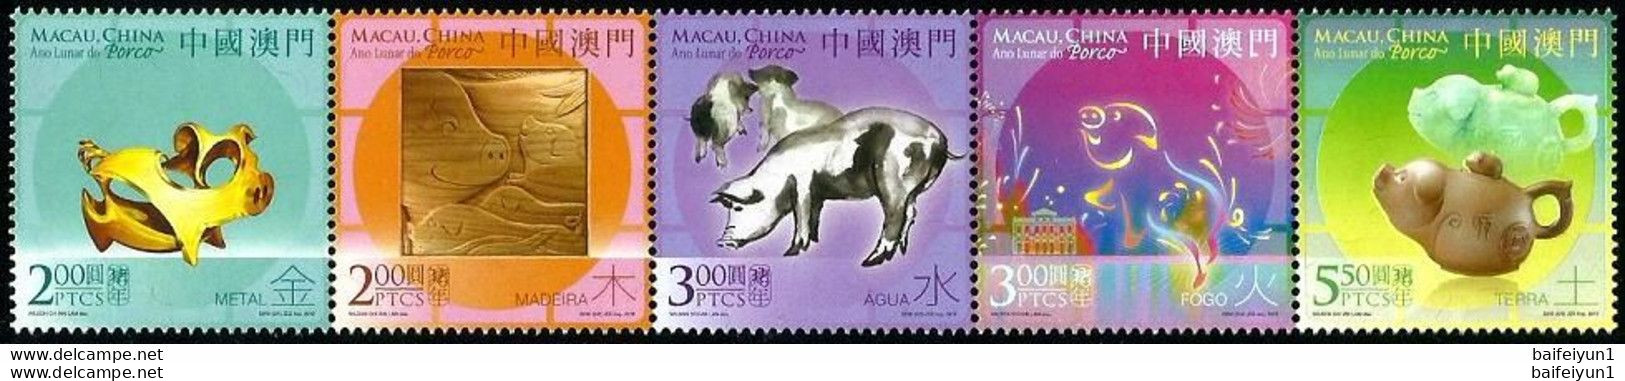 Macau 2019 China New Year Zodiac Of Pig Stamps 5v+ S/S Hologram - Hologrammes